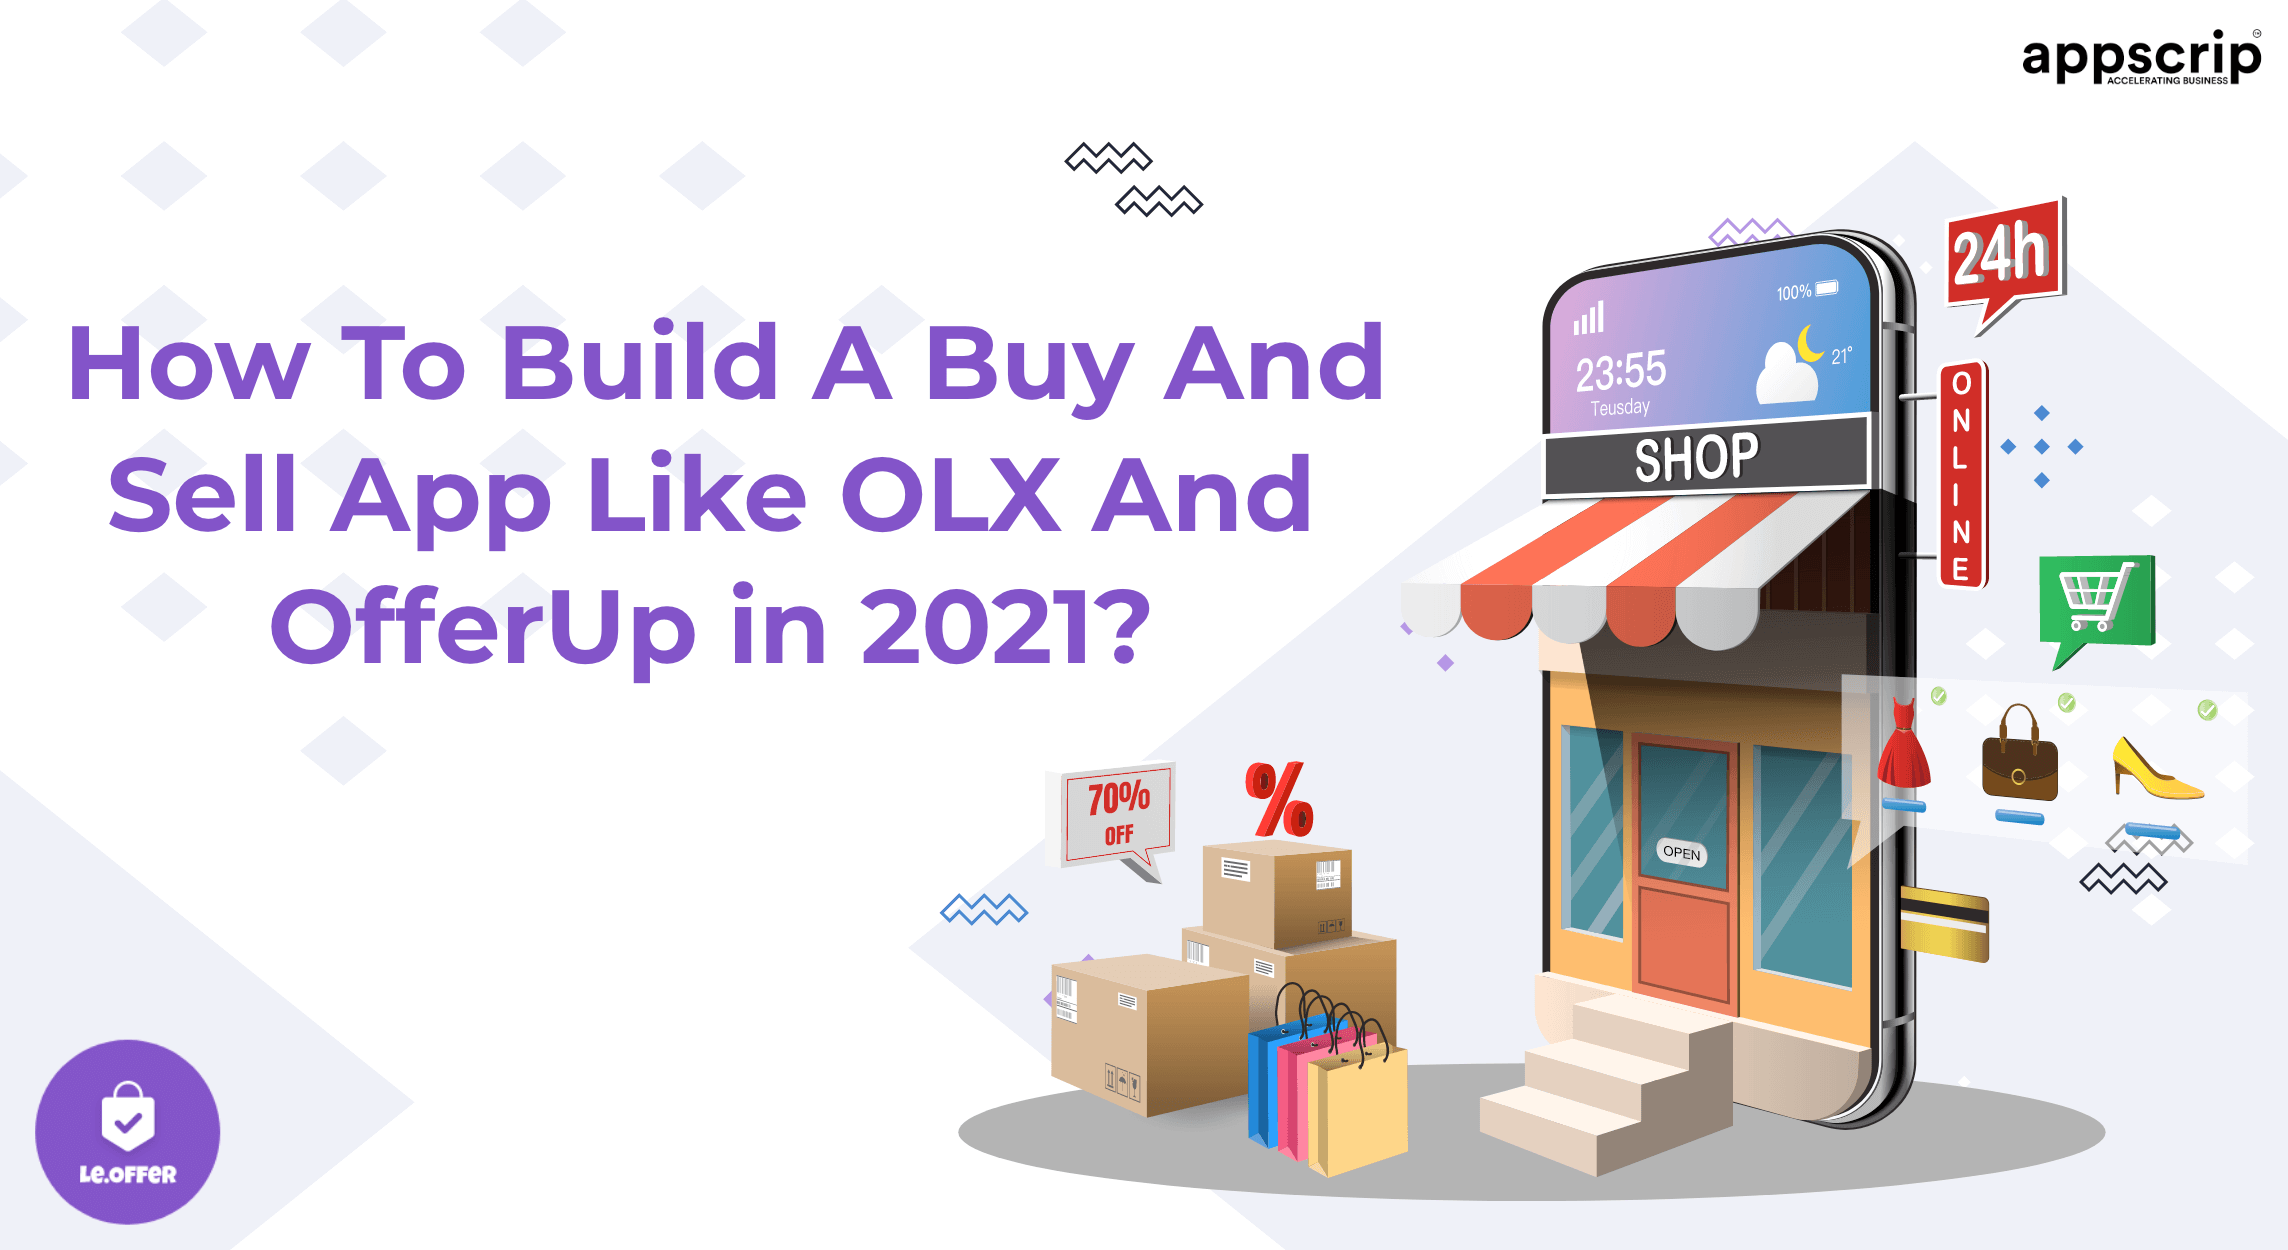 How To Build A Buy And Sell App Like OLX & OfferUp in 2021?